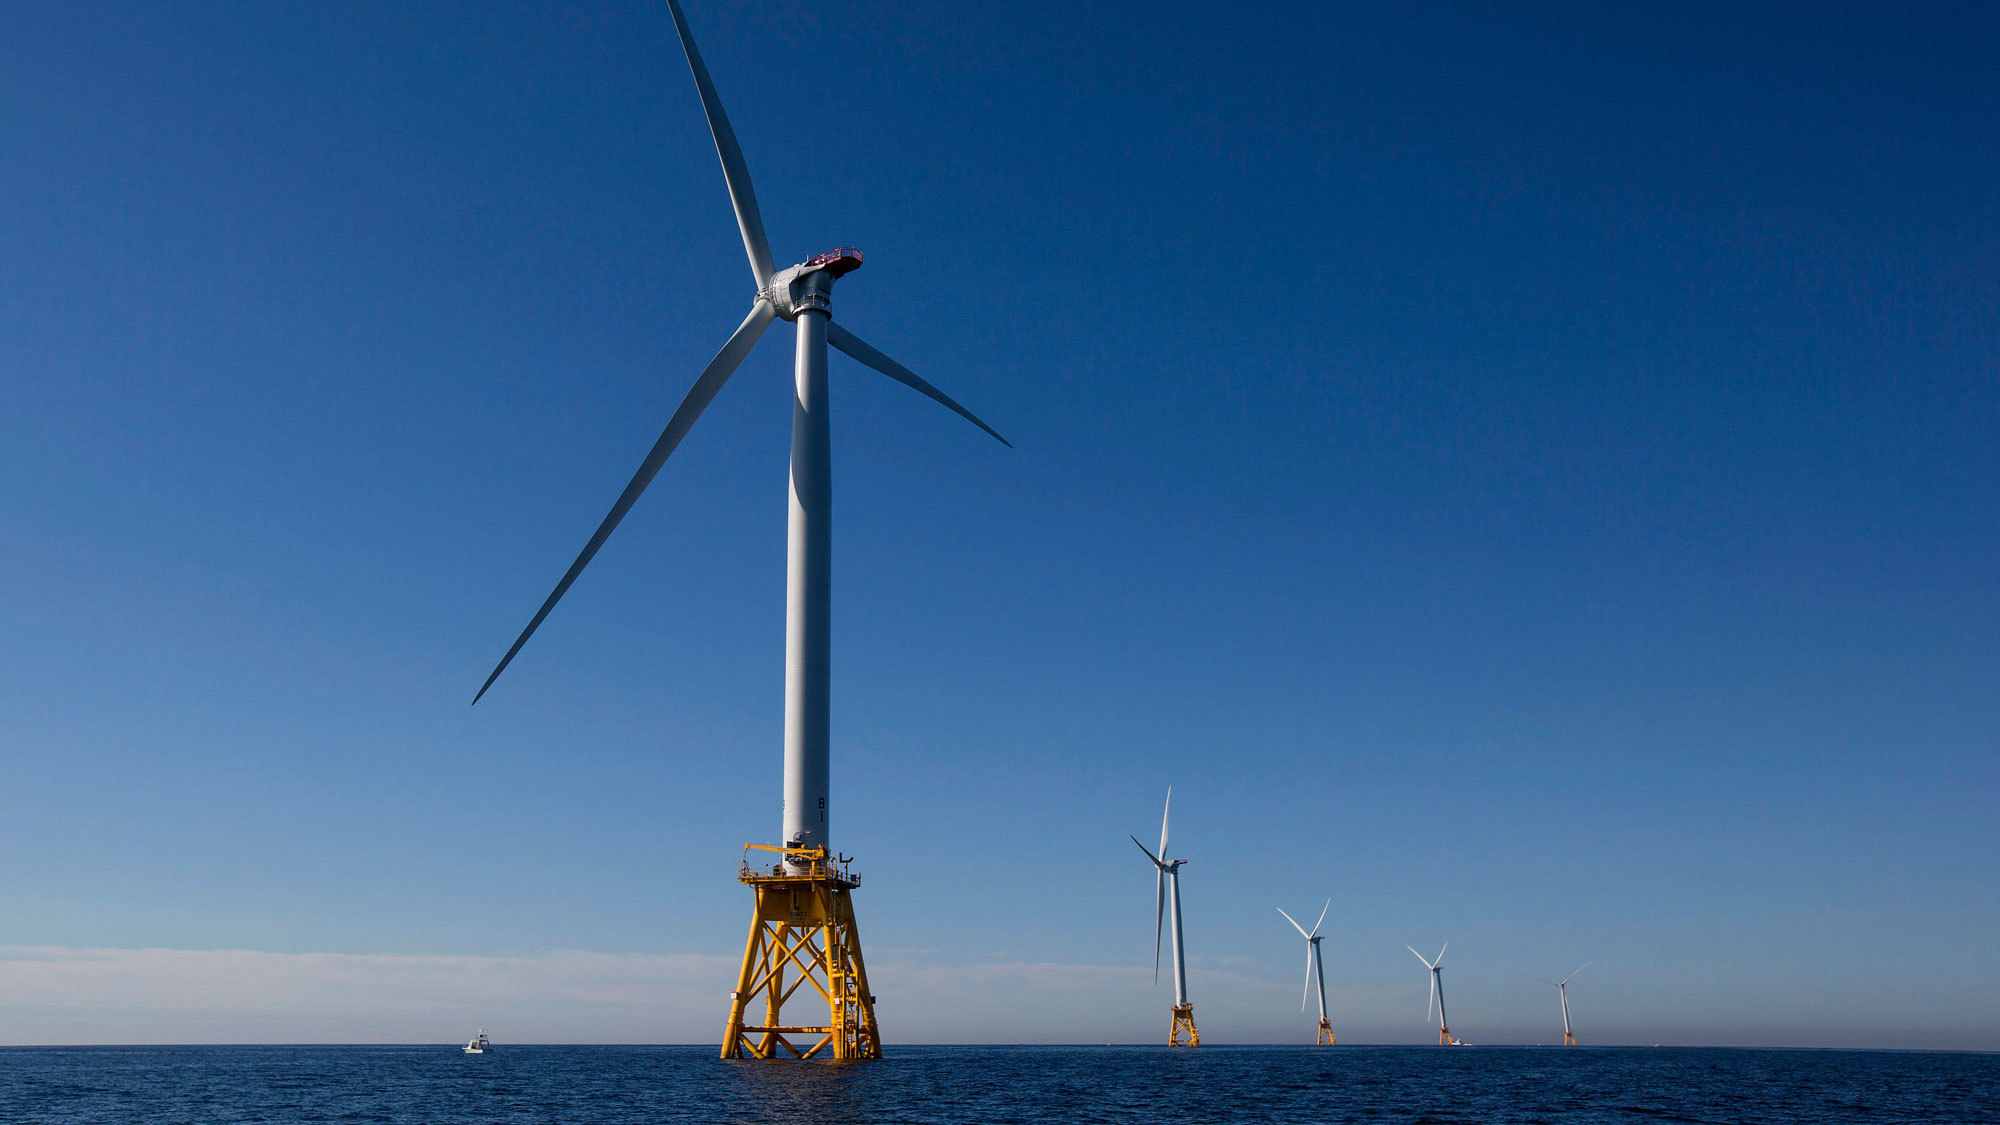 After an Uncertain Start, U.S. Offshore Wind Is Powering Up - Yale E360